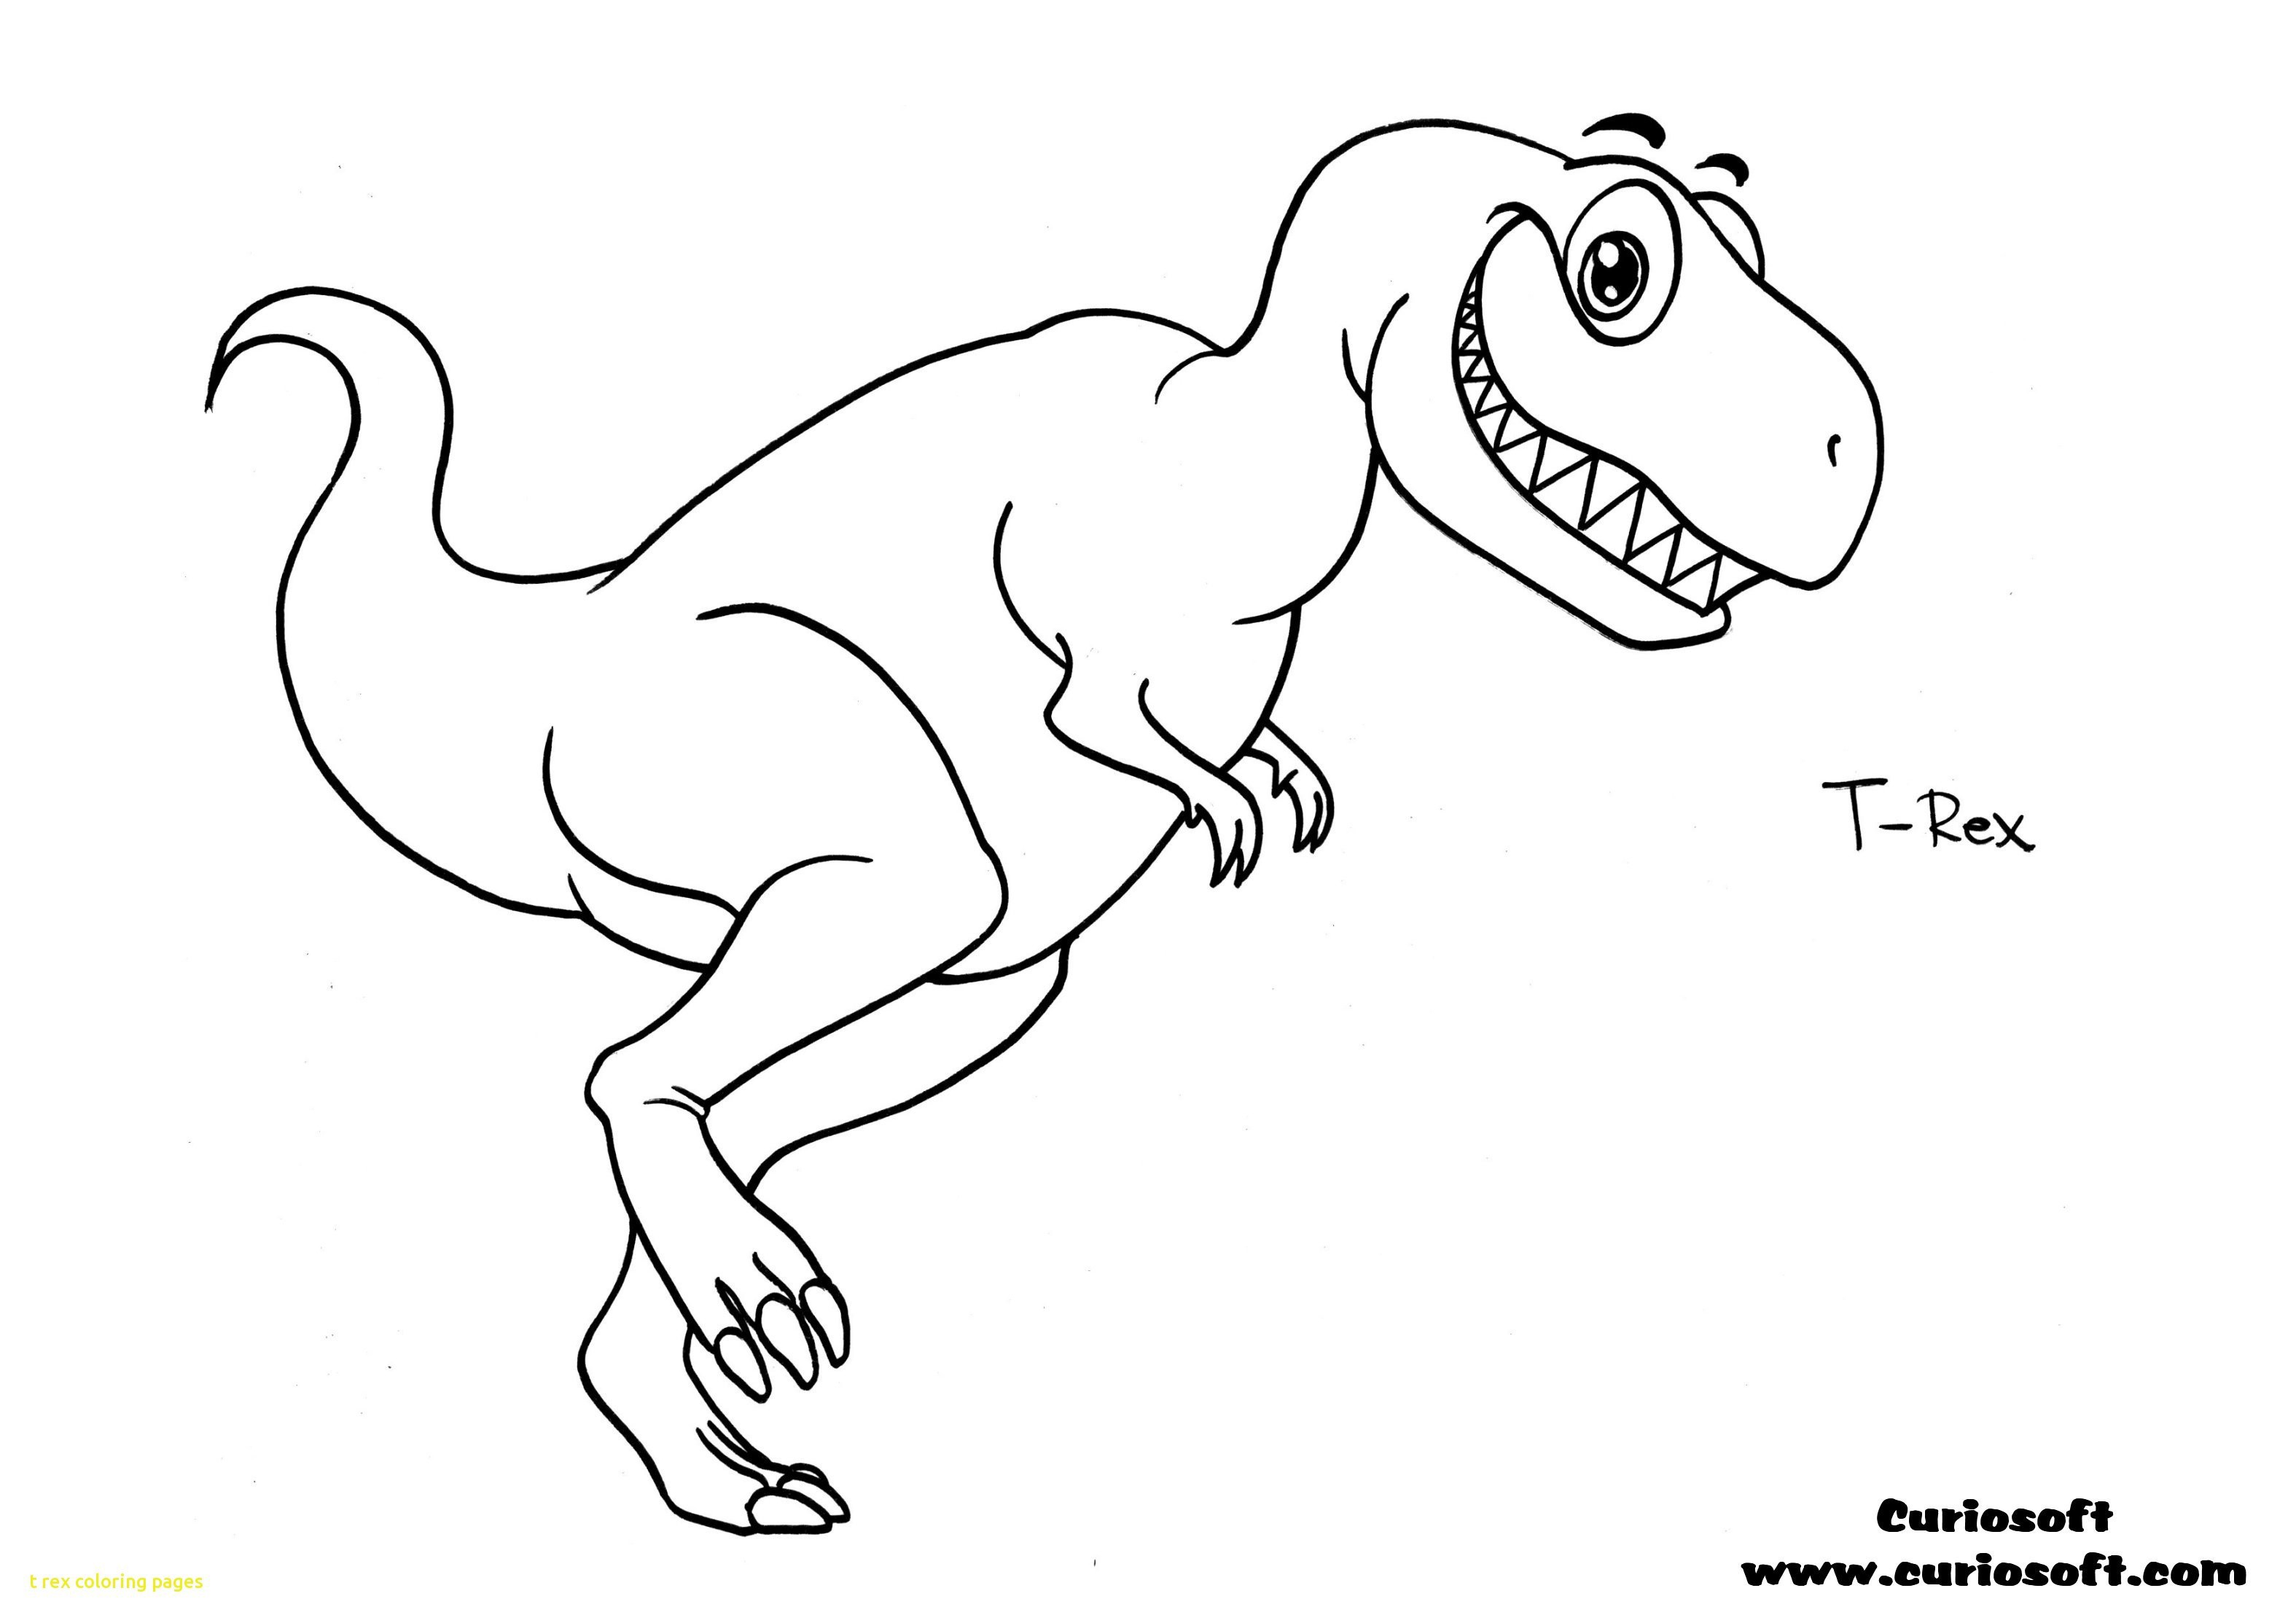 T Rex Coloring Pages for Preschoolers